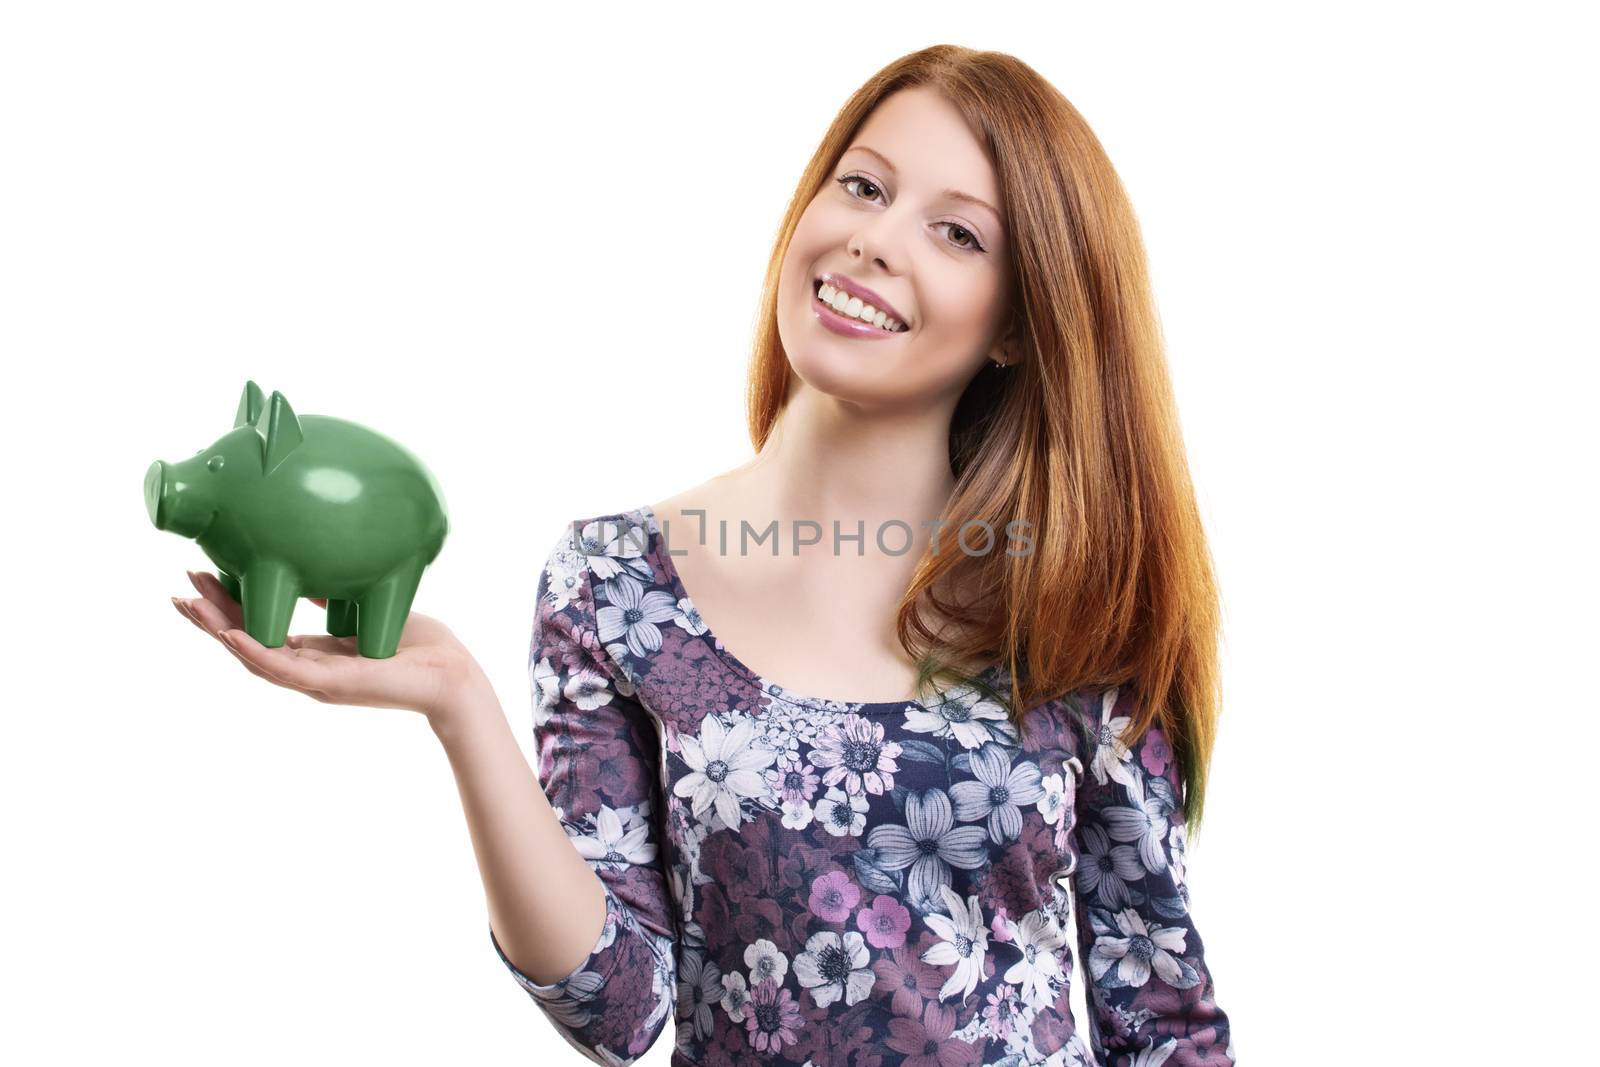 Portrait of a beautiful young woman holding a green piggy bank in her hands, isolated on white background. Saving concept. Thinking of the future concept.